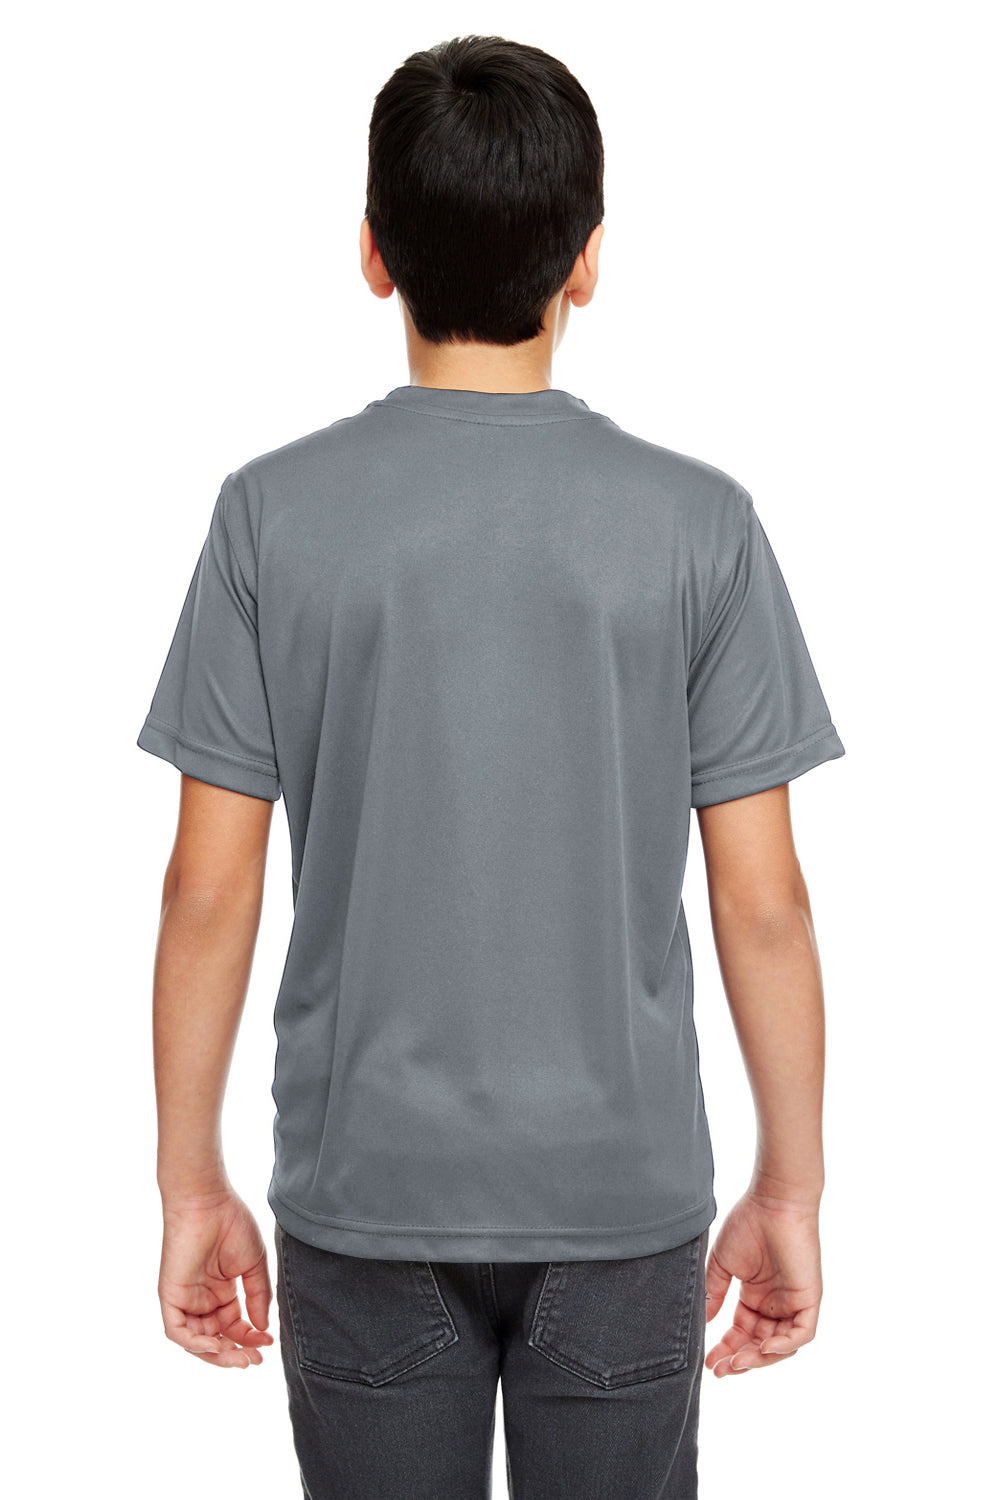 UltraClub 8620Y Youth Cool & Dry Performance Moisture Wicking Short Sleeve Crewneck T-Shirt Charcoal Grey Back